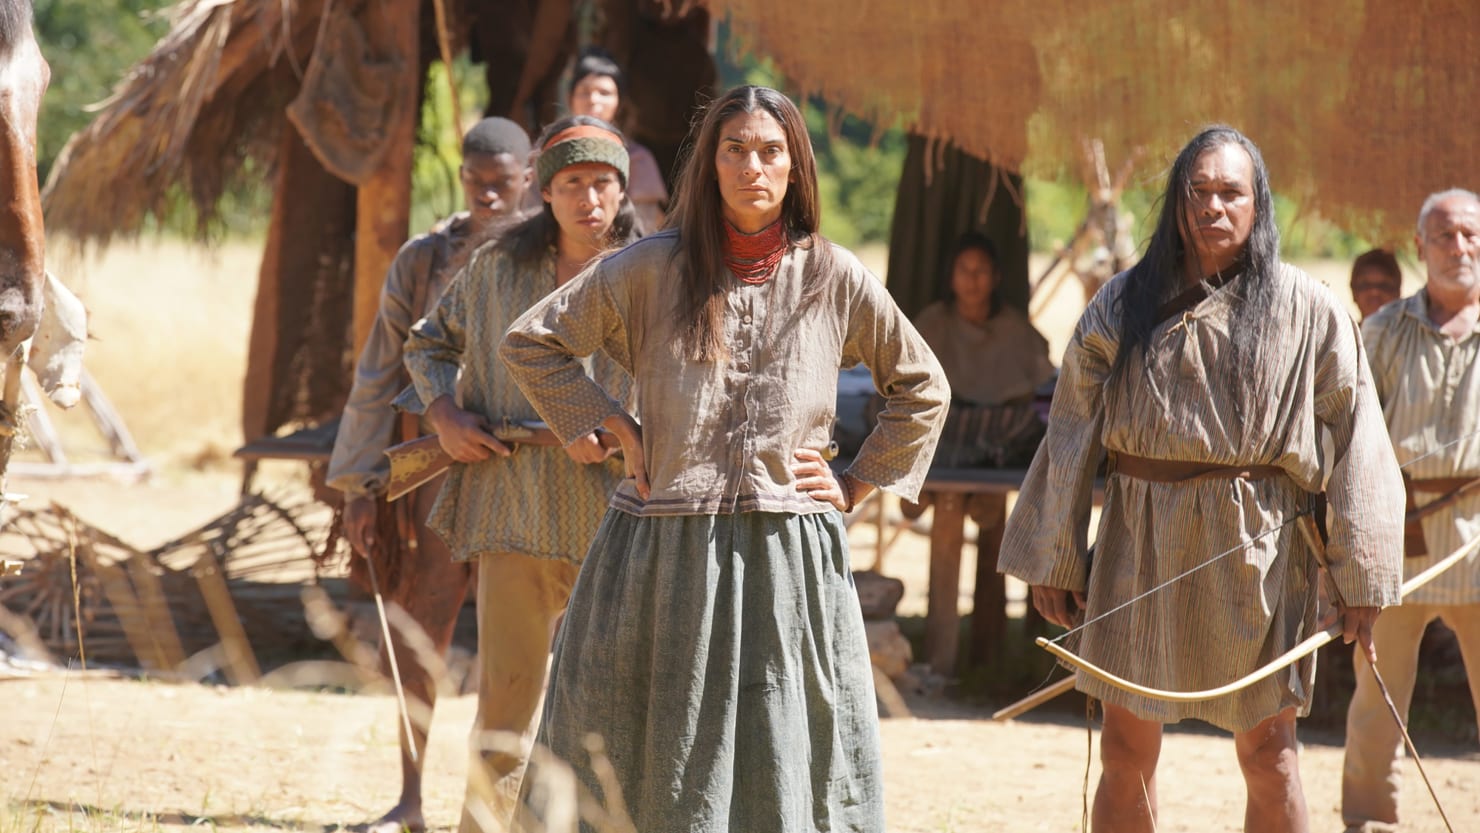 HBO’s “Exterminate All the Brutes” is a flawed study of white colonialist rape and terrorism